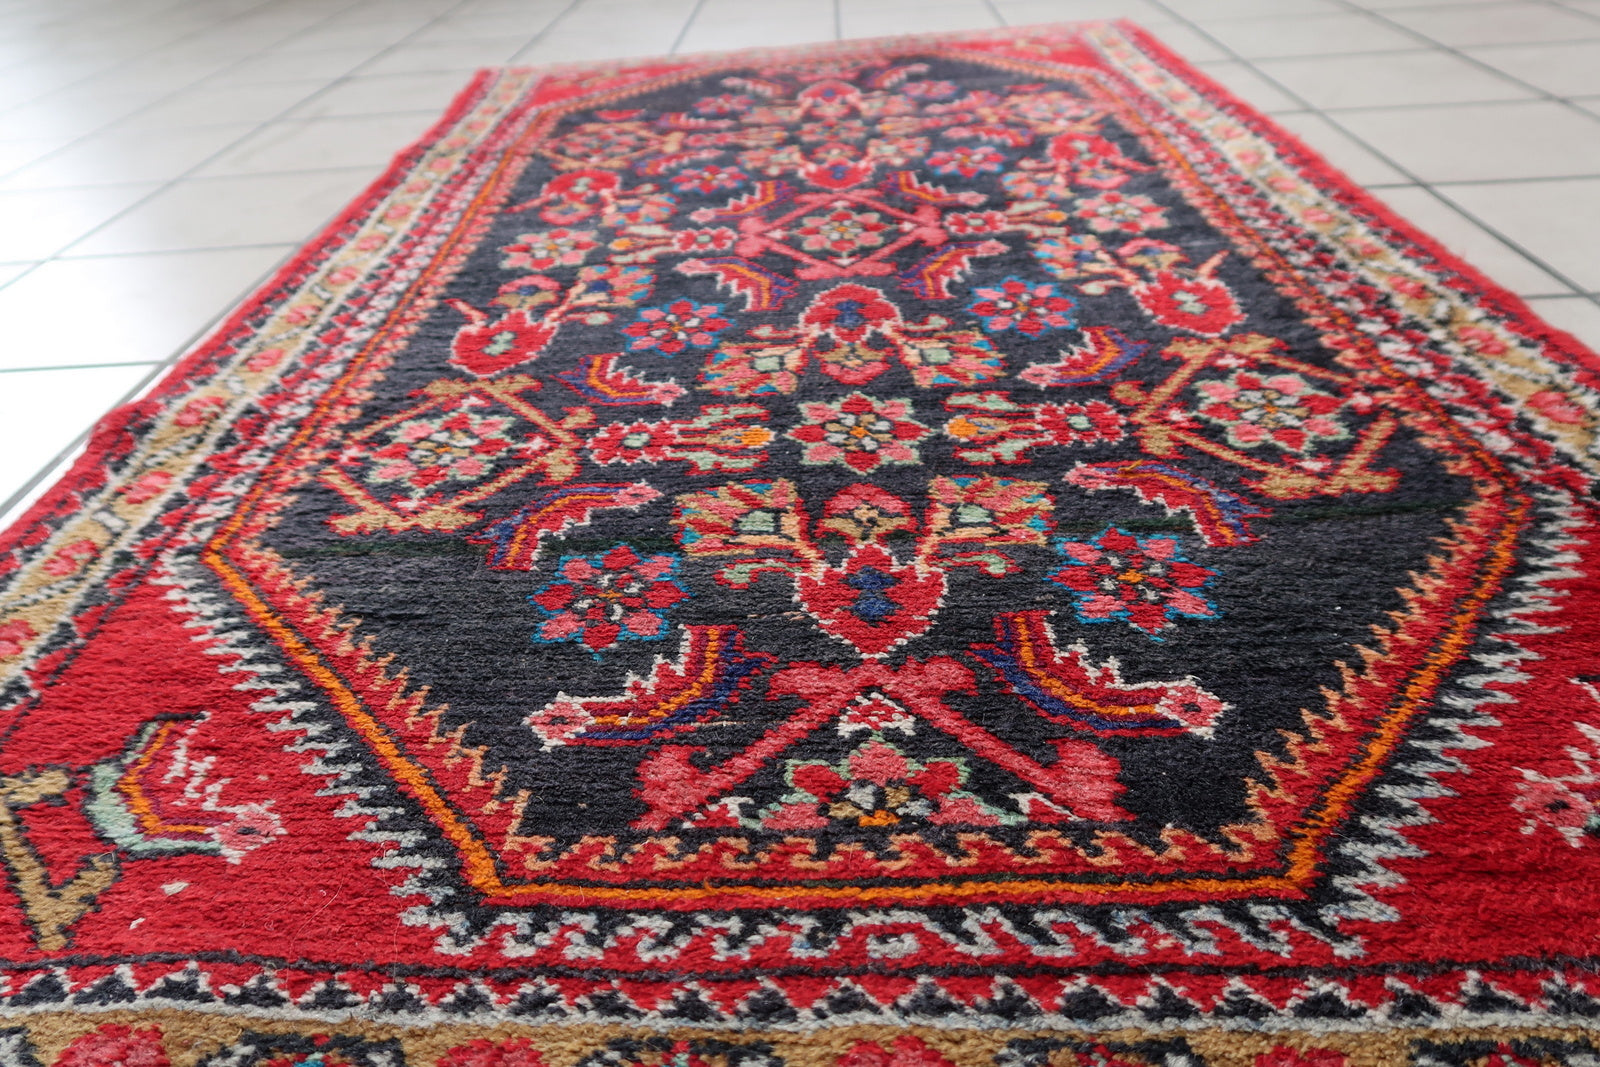 Close-up of size on Handmade Vintage Persian Hamadan Rug - Detailed view showcasing the rug's compact yet impactful size.